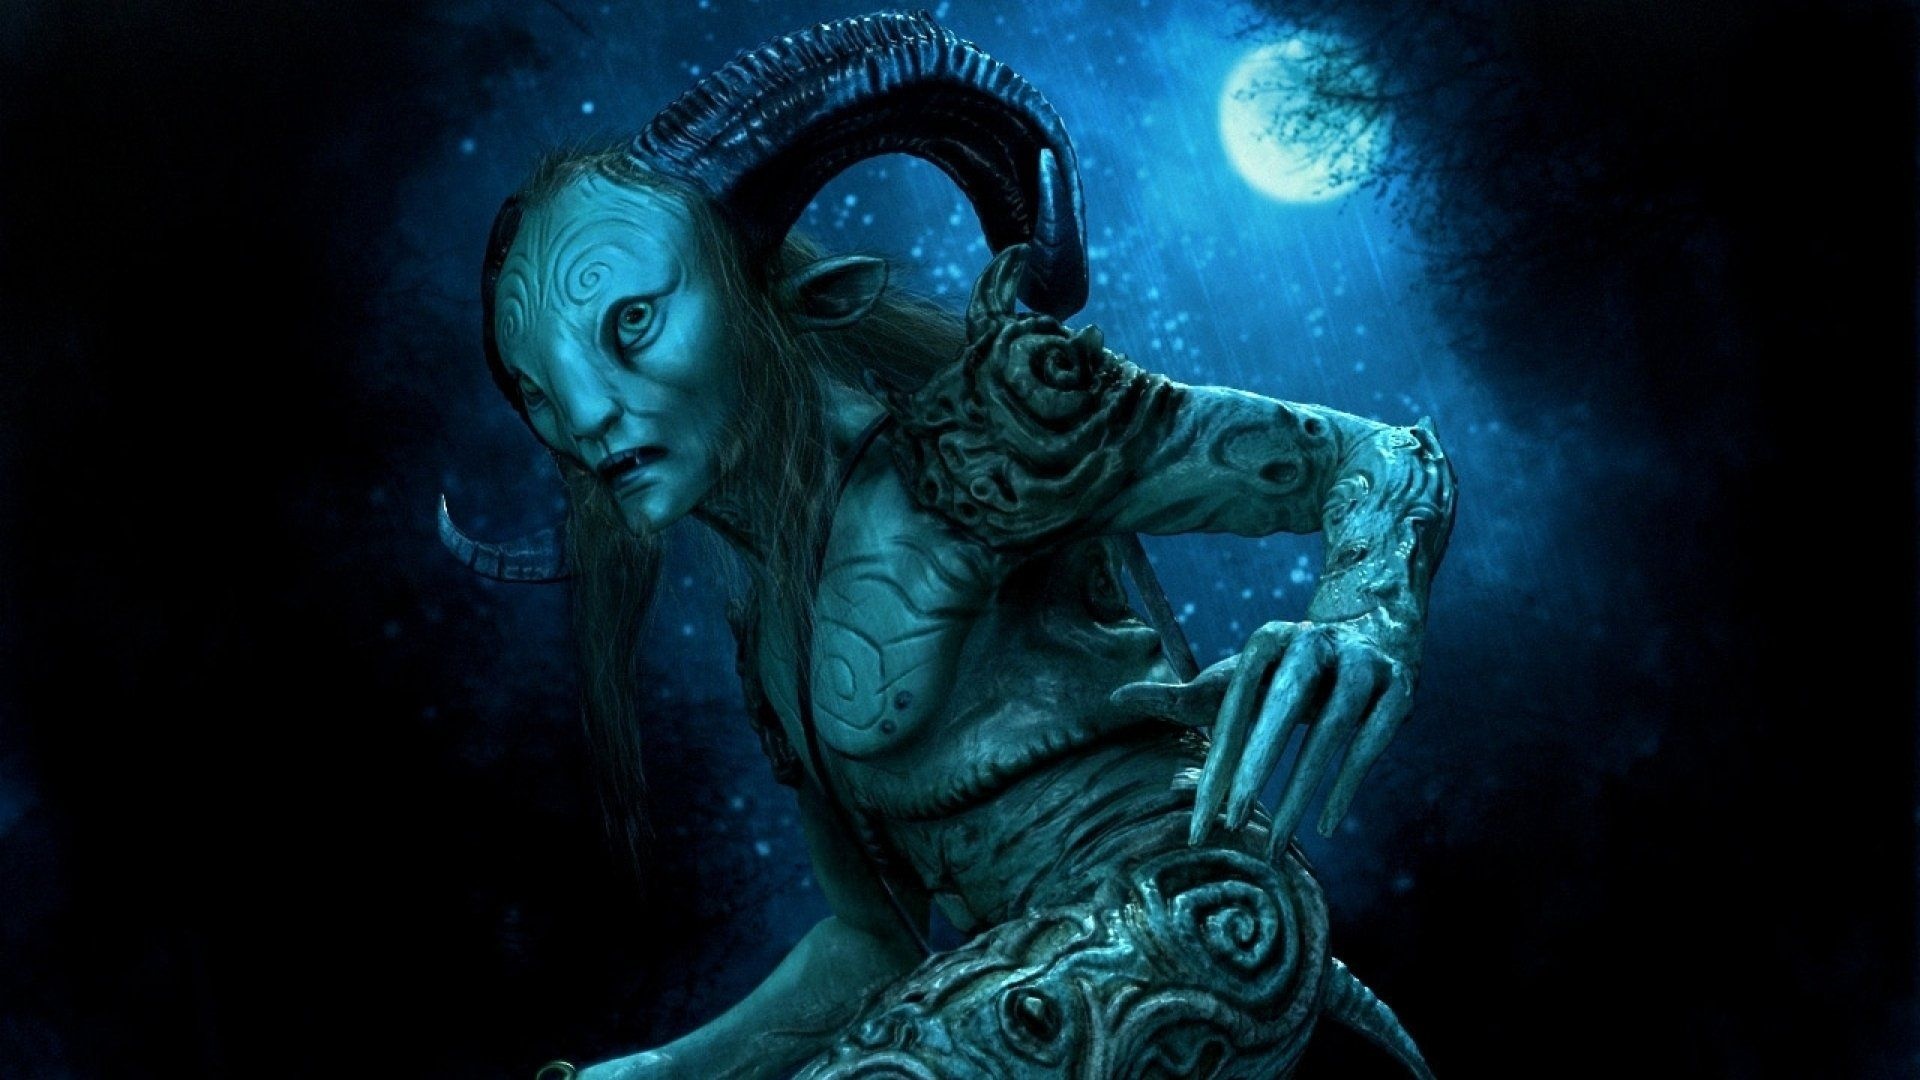 Pan's Labyrinth, Enigmatic faun character, Artistically rendered, Surreal fantasy, 1920x1080 Full HD Desktop